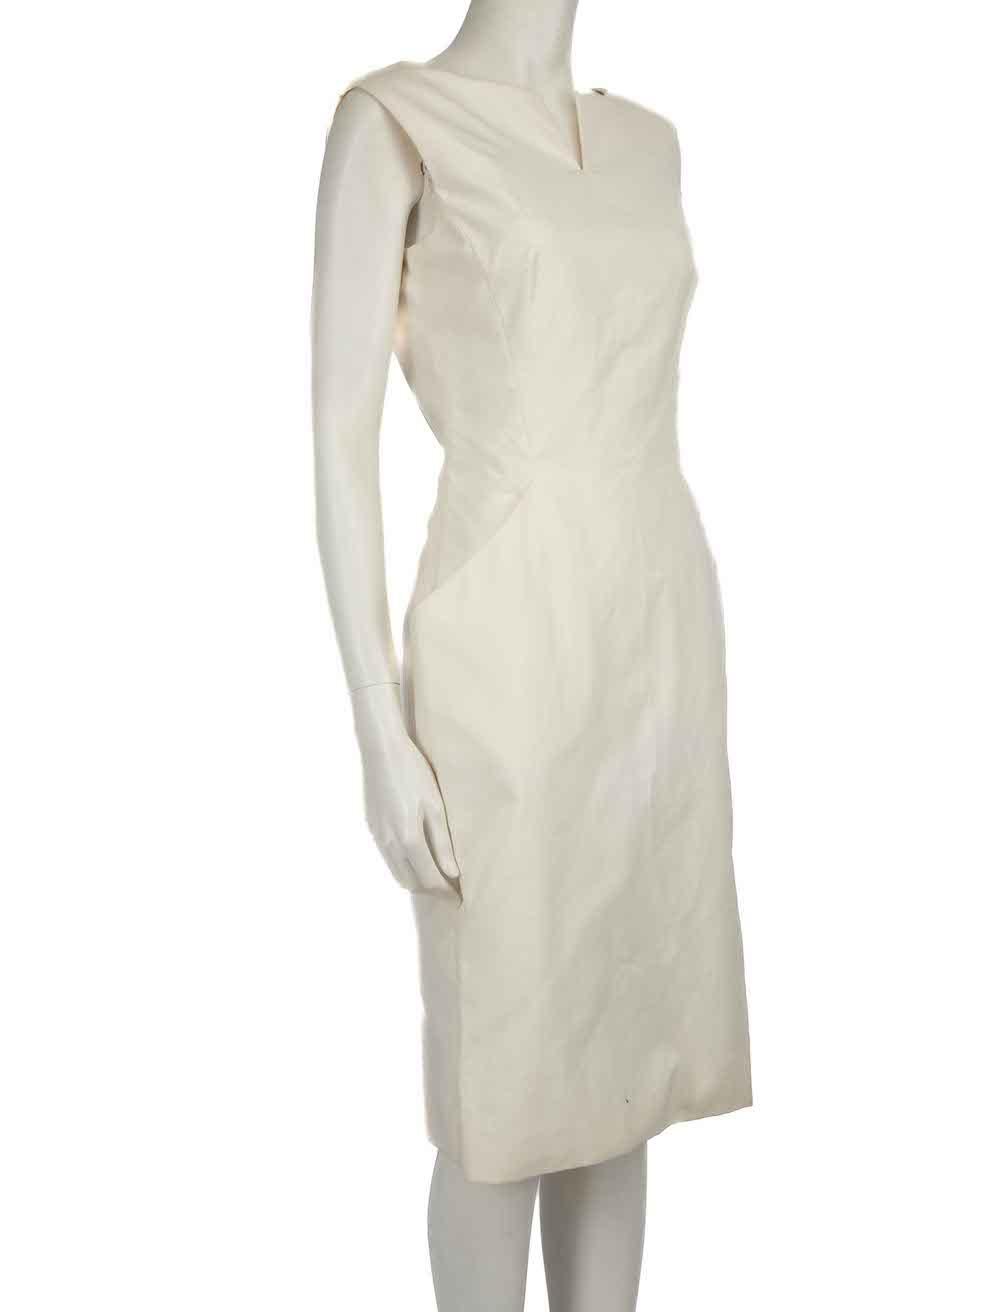 CONDITION is Never worn, with tags. No visible wear to dress is evident on this new Alexander McQueen designer resale item.
 
 
 
 Details
 
 
 White
 
 Cotton
 
 Midi dress
 
 V neckline
 
 Structured detail
 
 2x Front side pockets
 
 Back zip